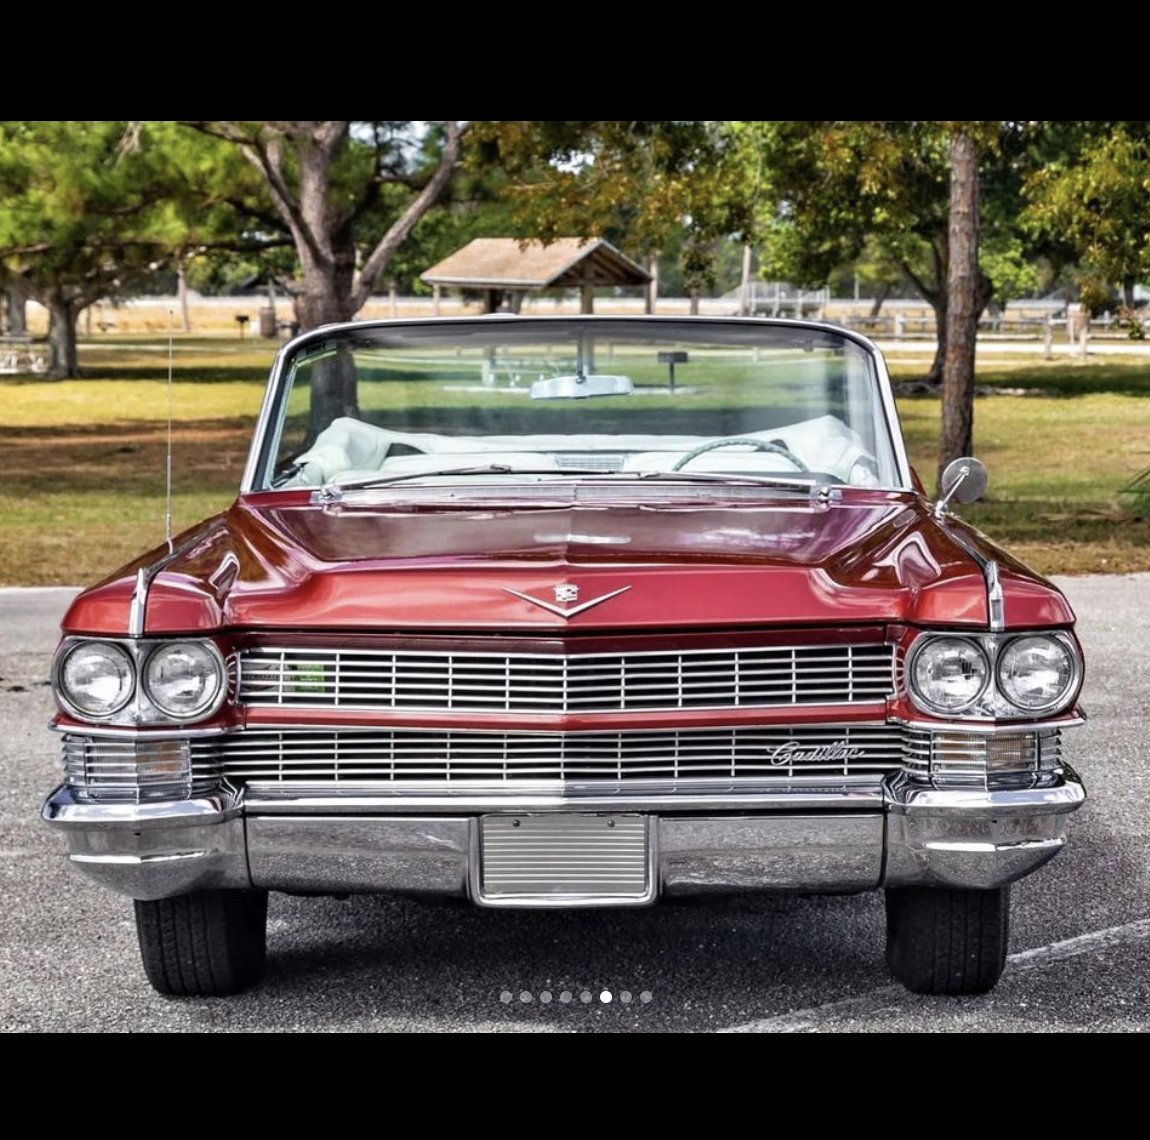 Today's #FlashbackFriday post is of a stunning 1964 Cadillac DeVille Convertible! What a beauty!

Photos by @classiccarart

-
-
#cadillac #deville #convertible #classiccars #classiccar #classiccadillac #retrocars